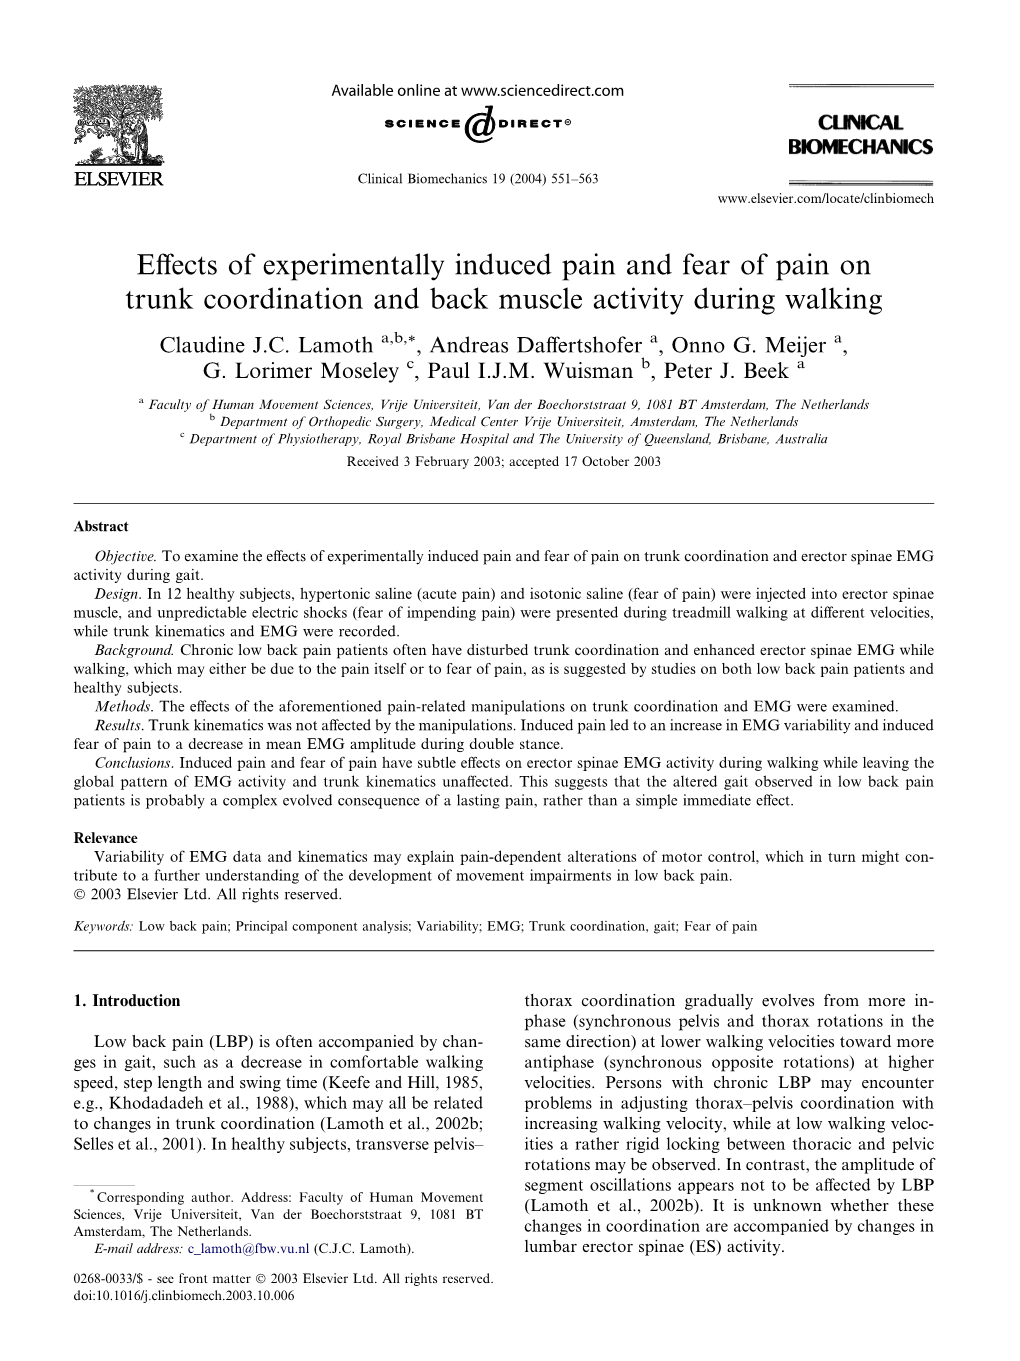 Effects of Experimentally Induced Pain and Fear of Pain on Trunk Coordination and Back Muscle Activity During Walking